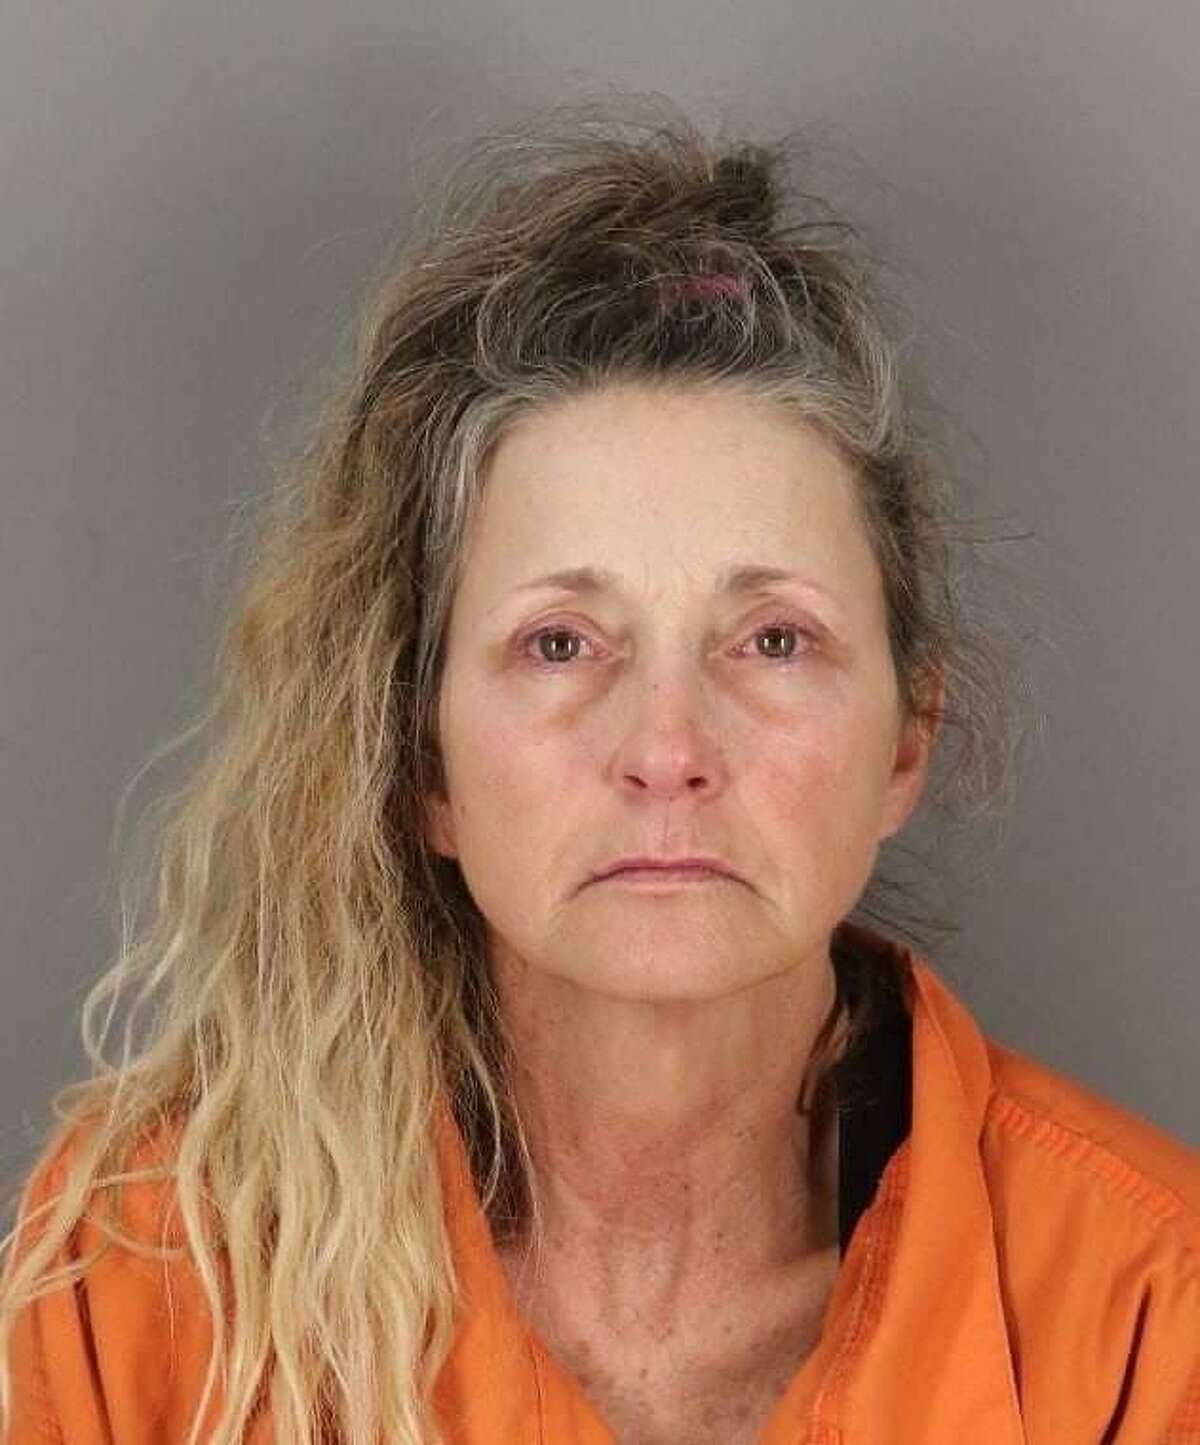 Kelli Diedre Sartin, 53, was charged with murder by the Port Arthur Police Department, on Sept. 9, 2019.